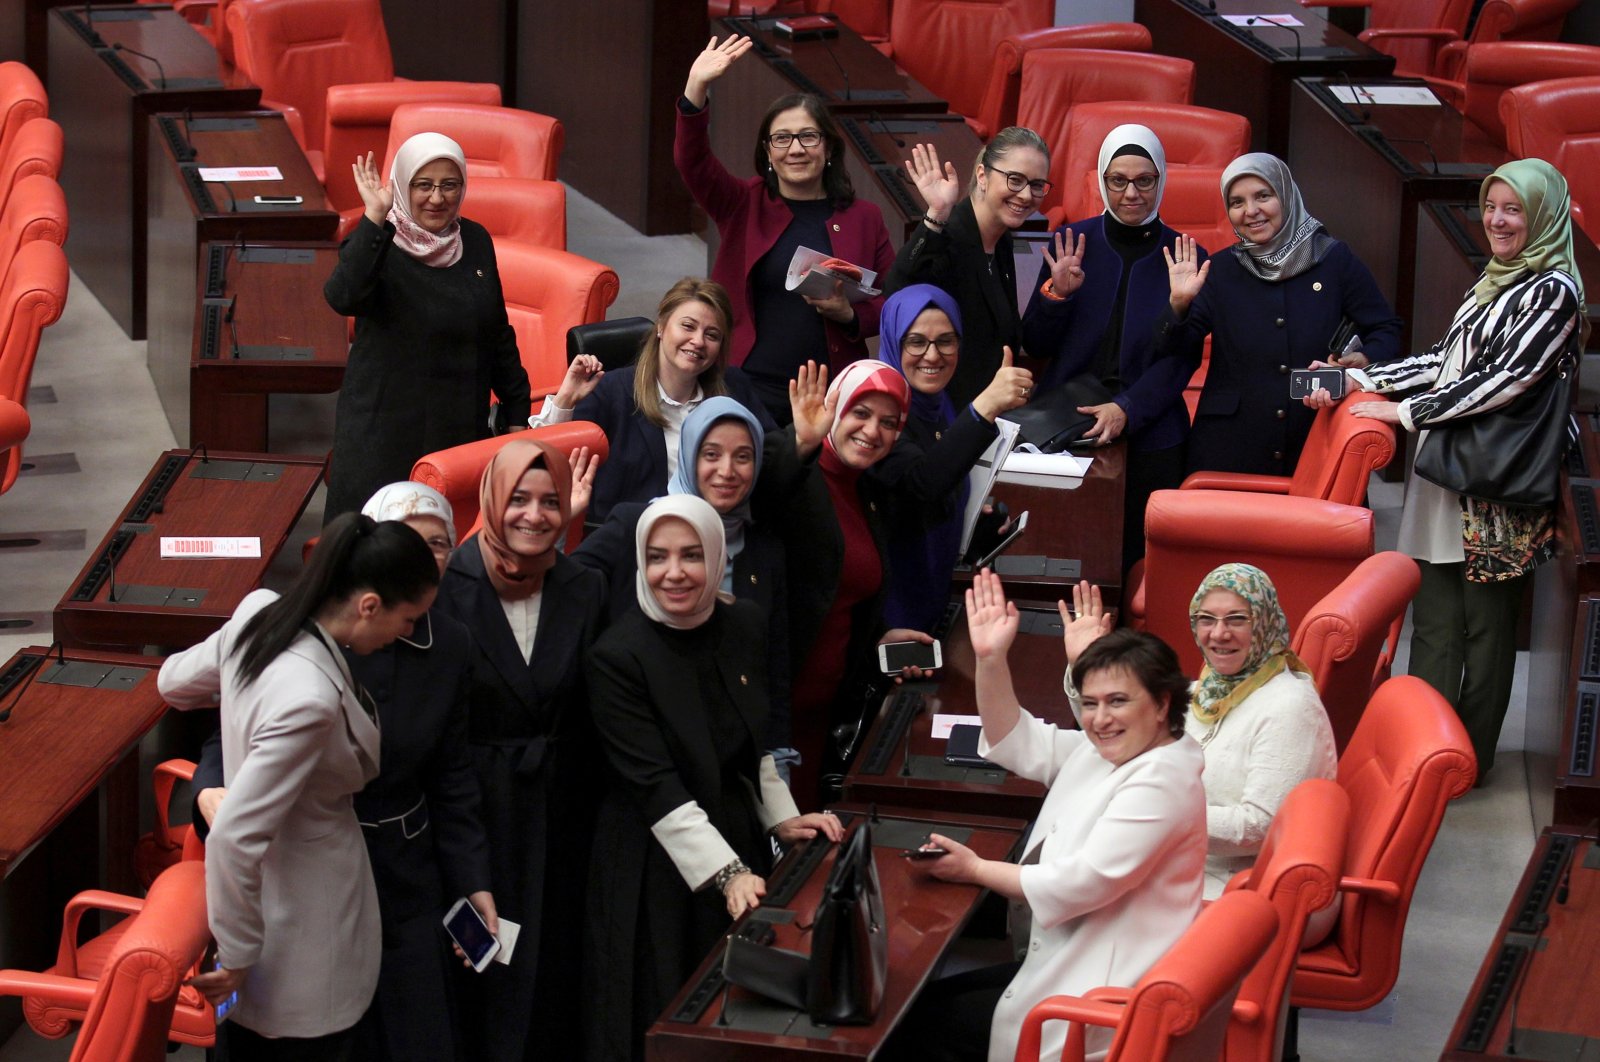 Female members of Parliament from the Justice and Development Party (AK Party) pose after a debate at the assembly, in the capital Ankara, Türkiye, May 20, 2016. (Reuters Photo)